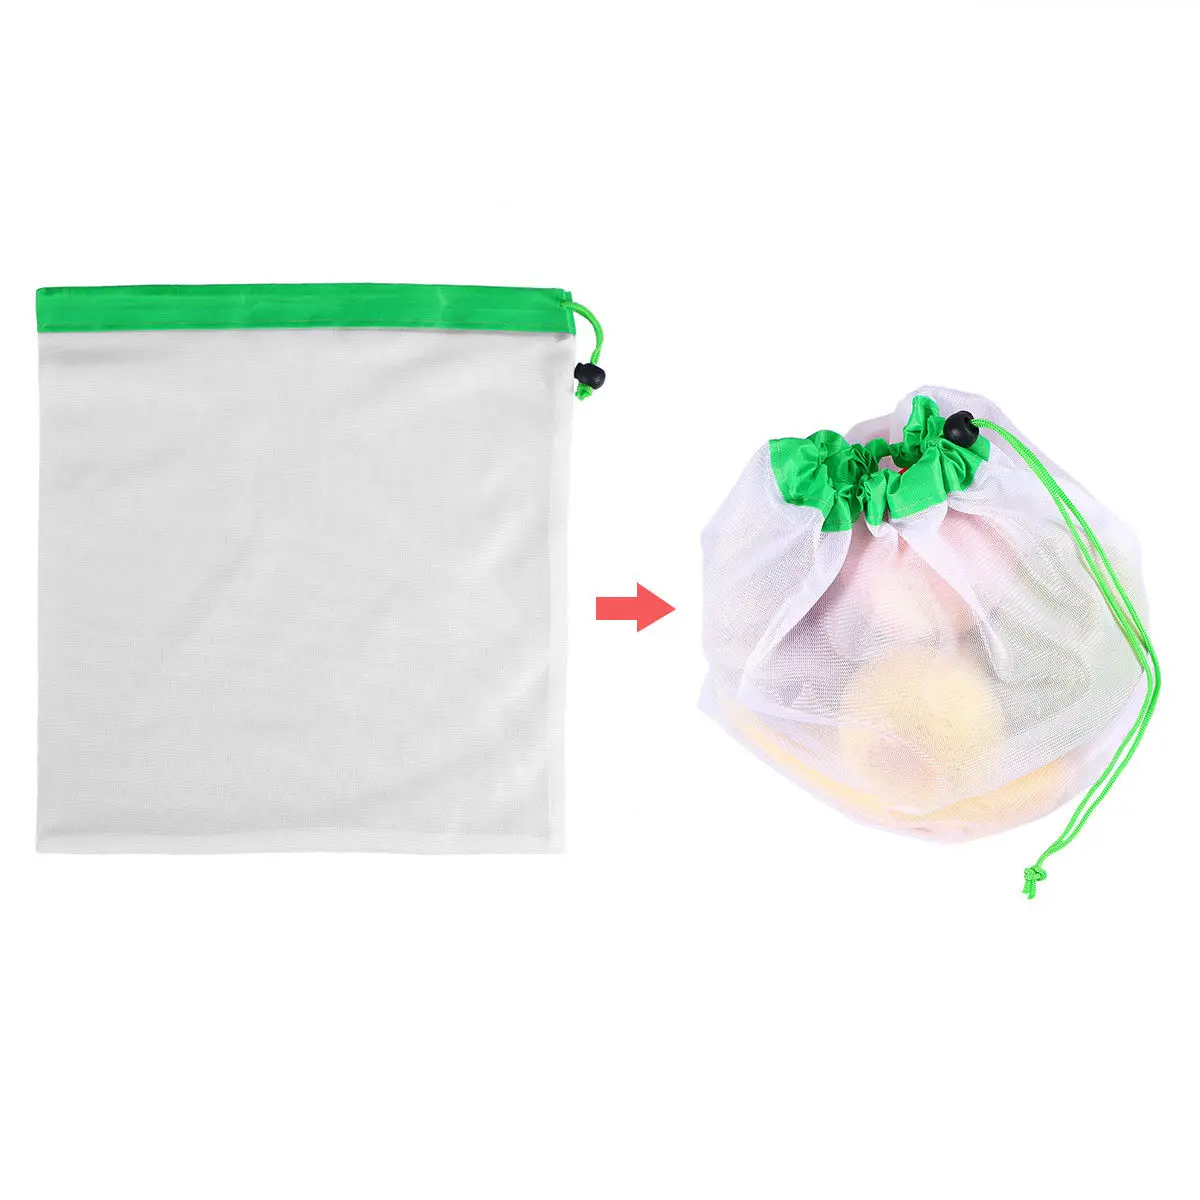 High Quality Reusable Mesh Bags Kitchen Washable Bags for Grocery Shopping Storage Fruit Vegetable Toys Sundries Organizer Bag